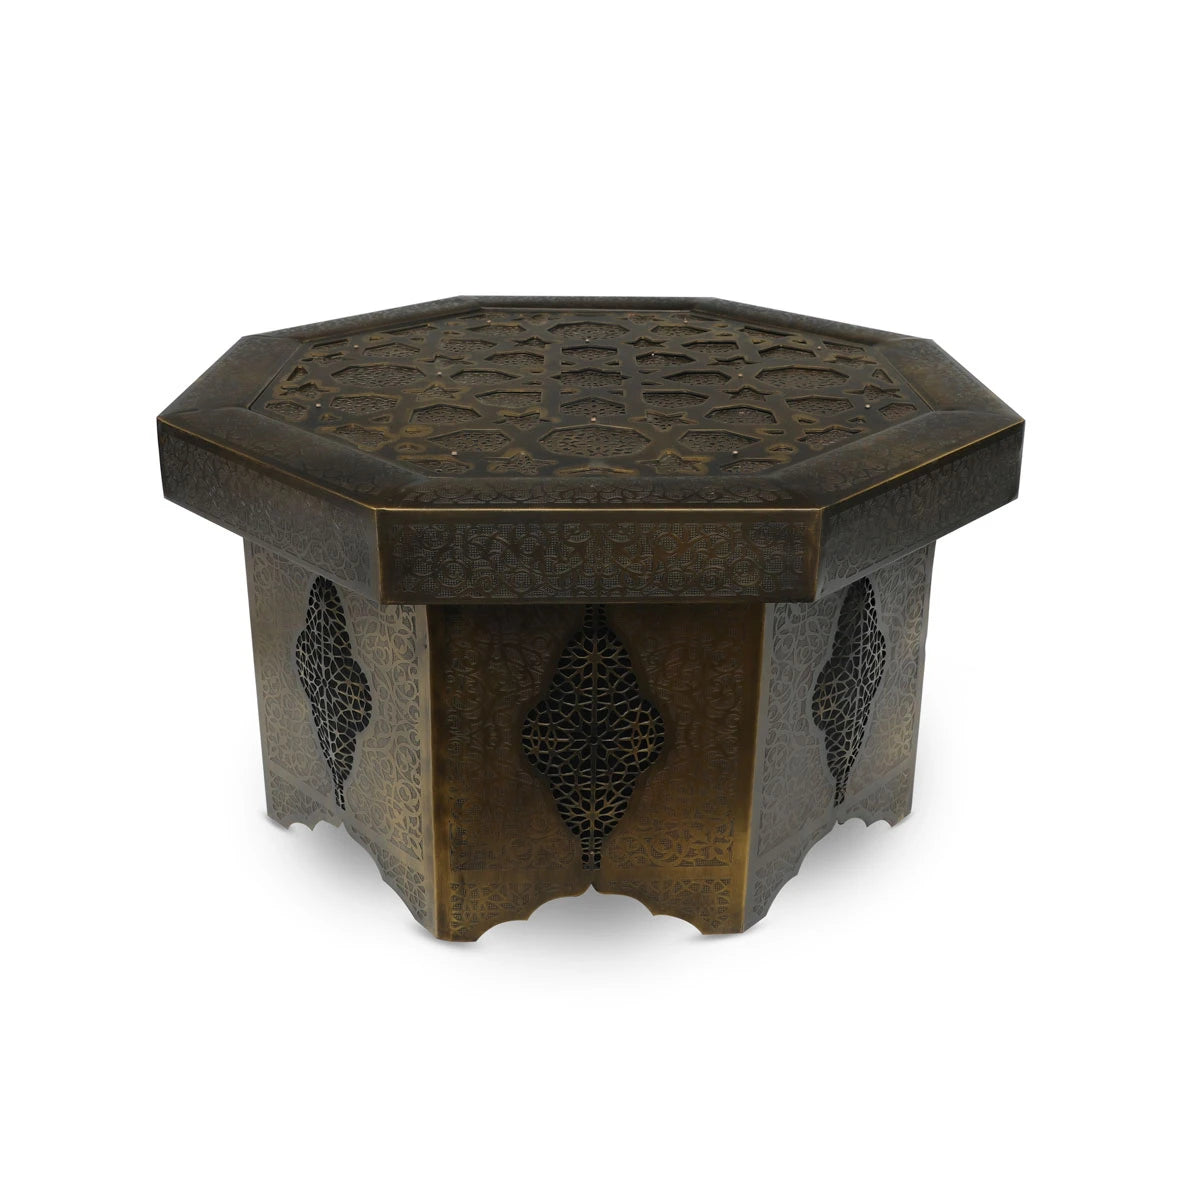 A Grand Brass Coffee Table with Handmade Hollow cut carvings and tapered with geometric patterns all over for Regal appeal